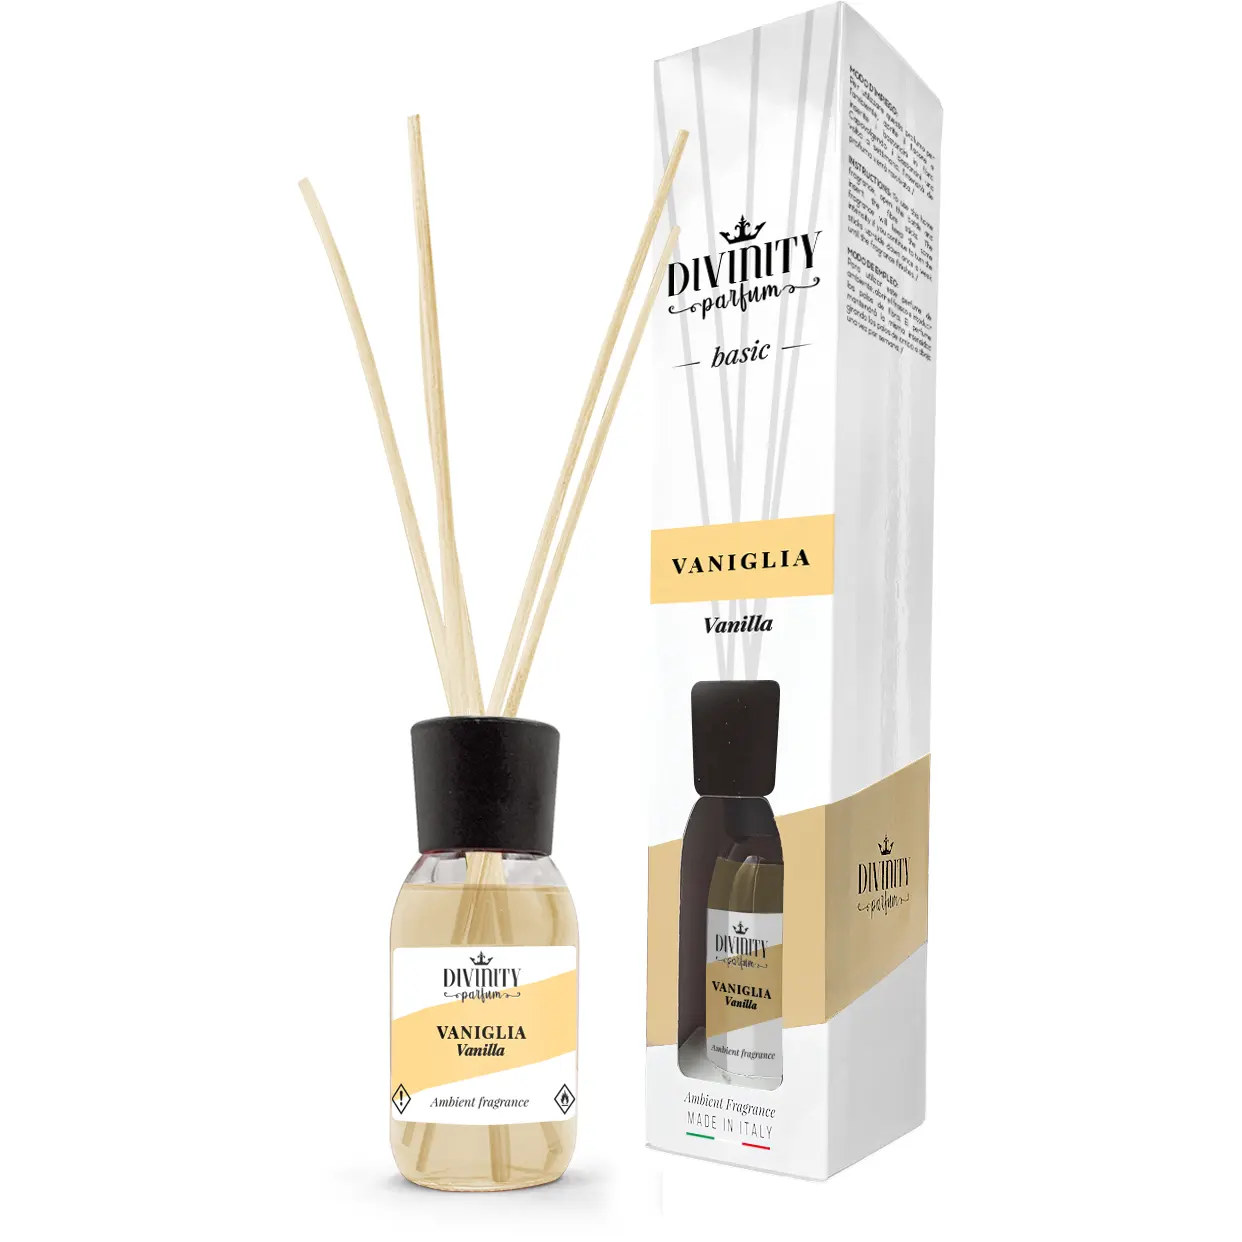 Top Air freshener Vanilla Italian basic line scent reed diffuser 125ml for wholesale home fragrance